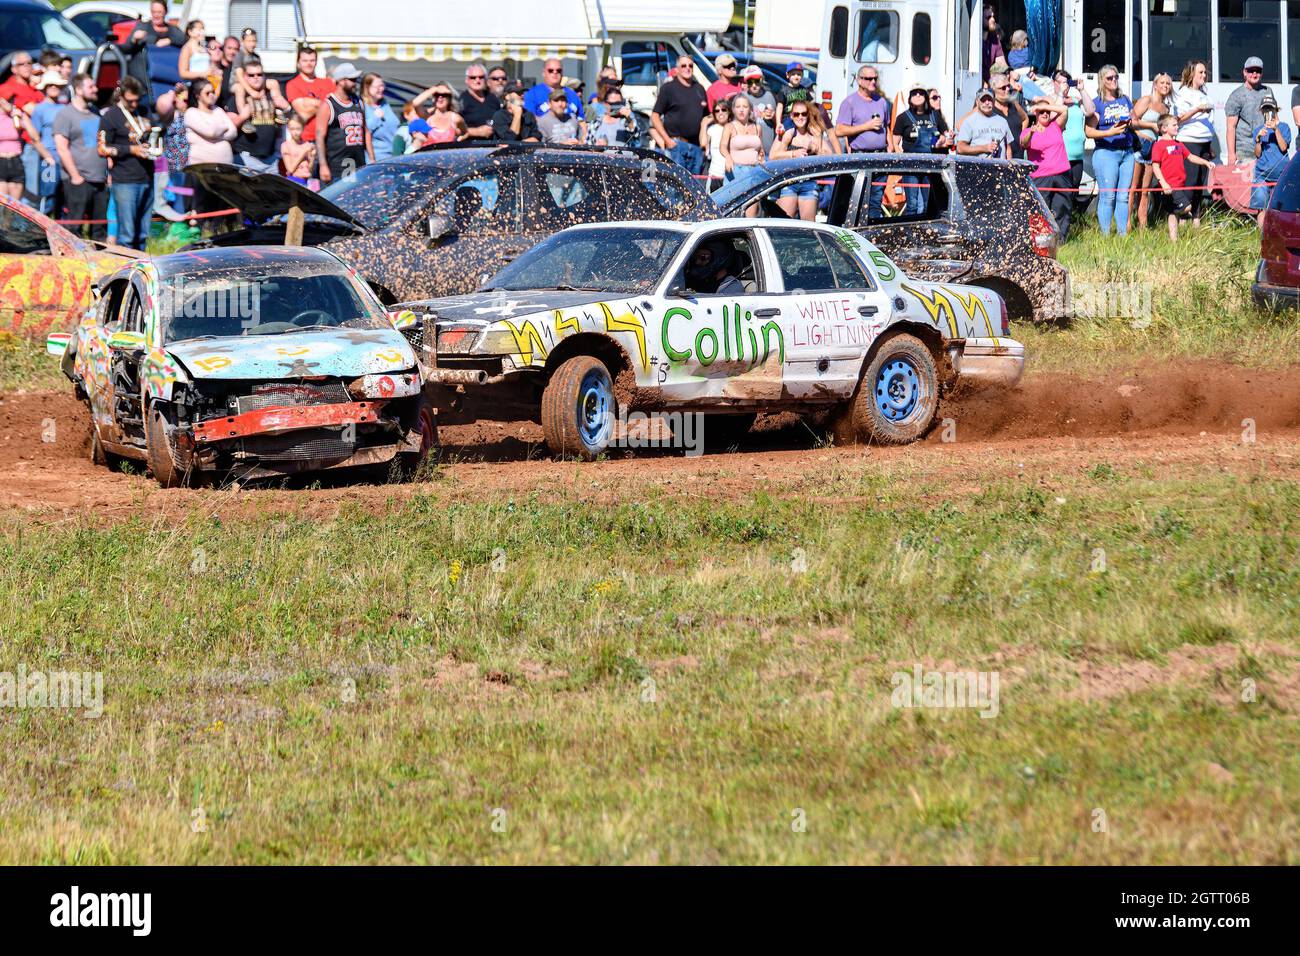 Norton, NB, Canada - September 11, 2021: Amateur demolition derby at the Redneck Raceway, in Norton NB. One car smashes into the side of another. Stock Photo